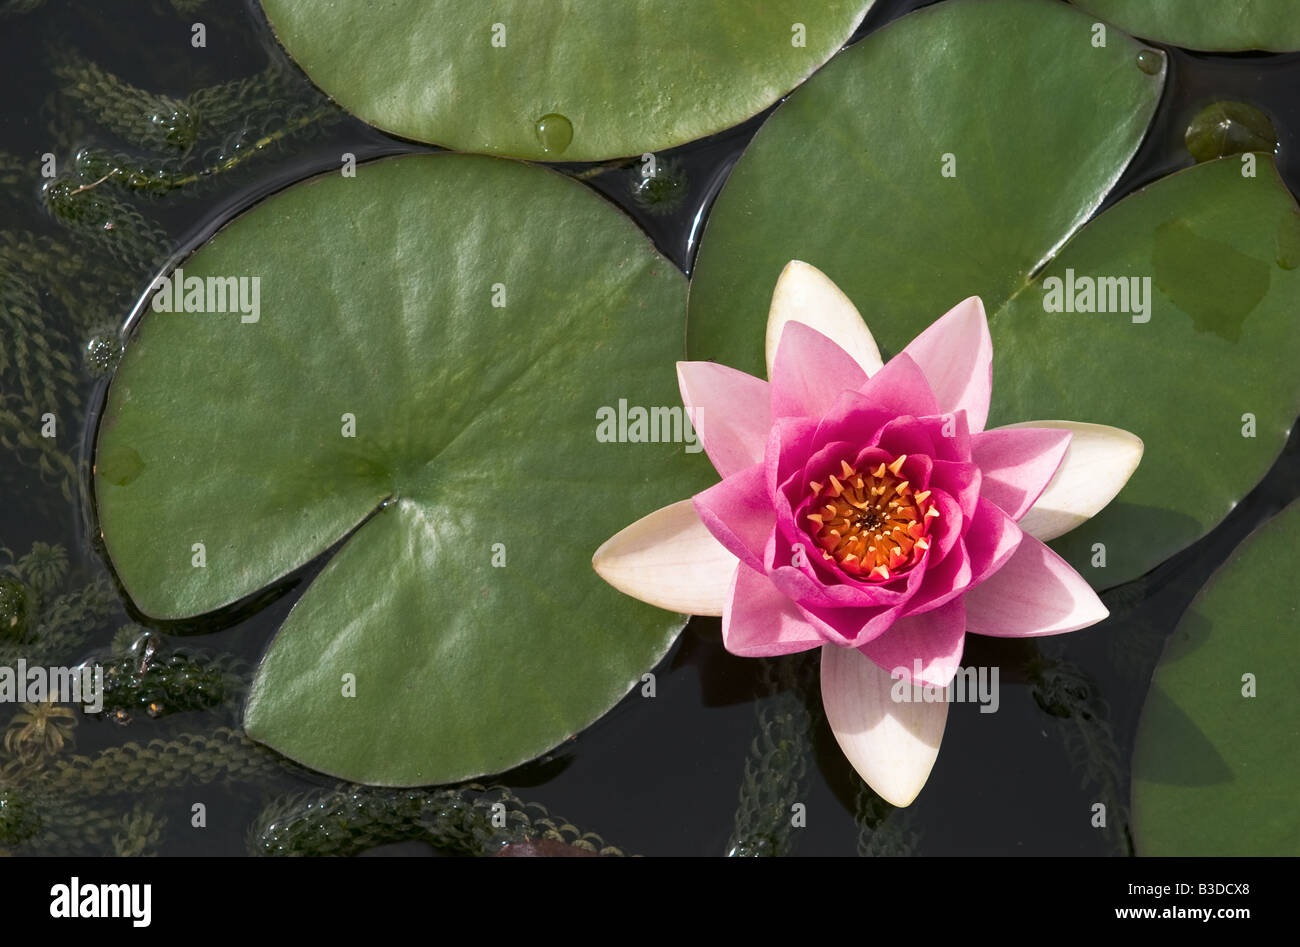 Pink Water Lilly Flower Stock Photo